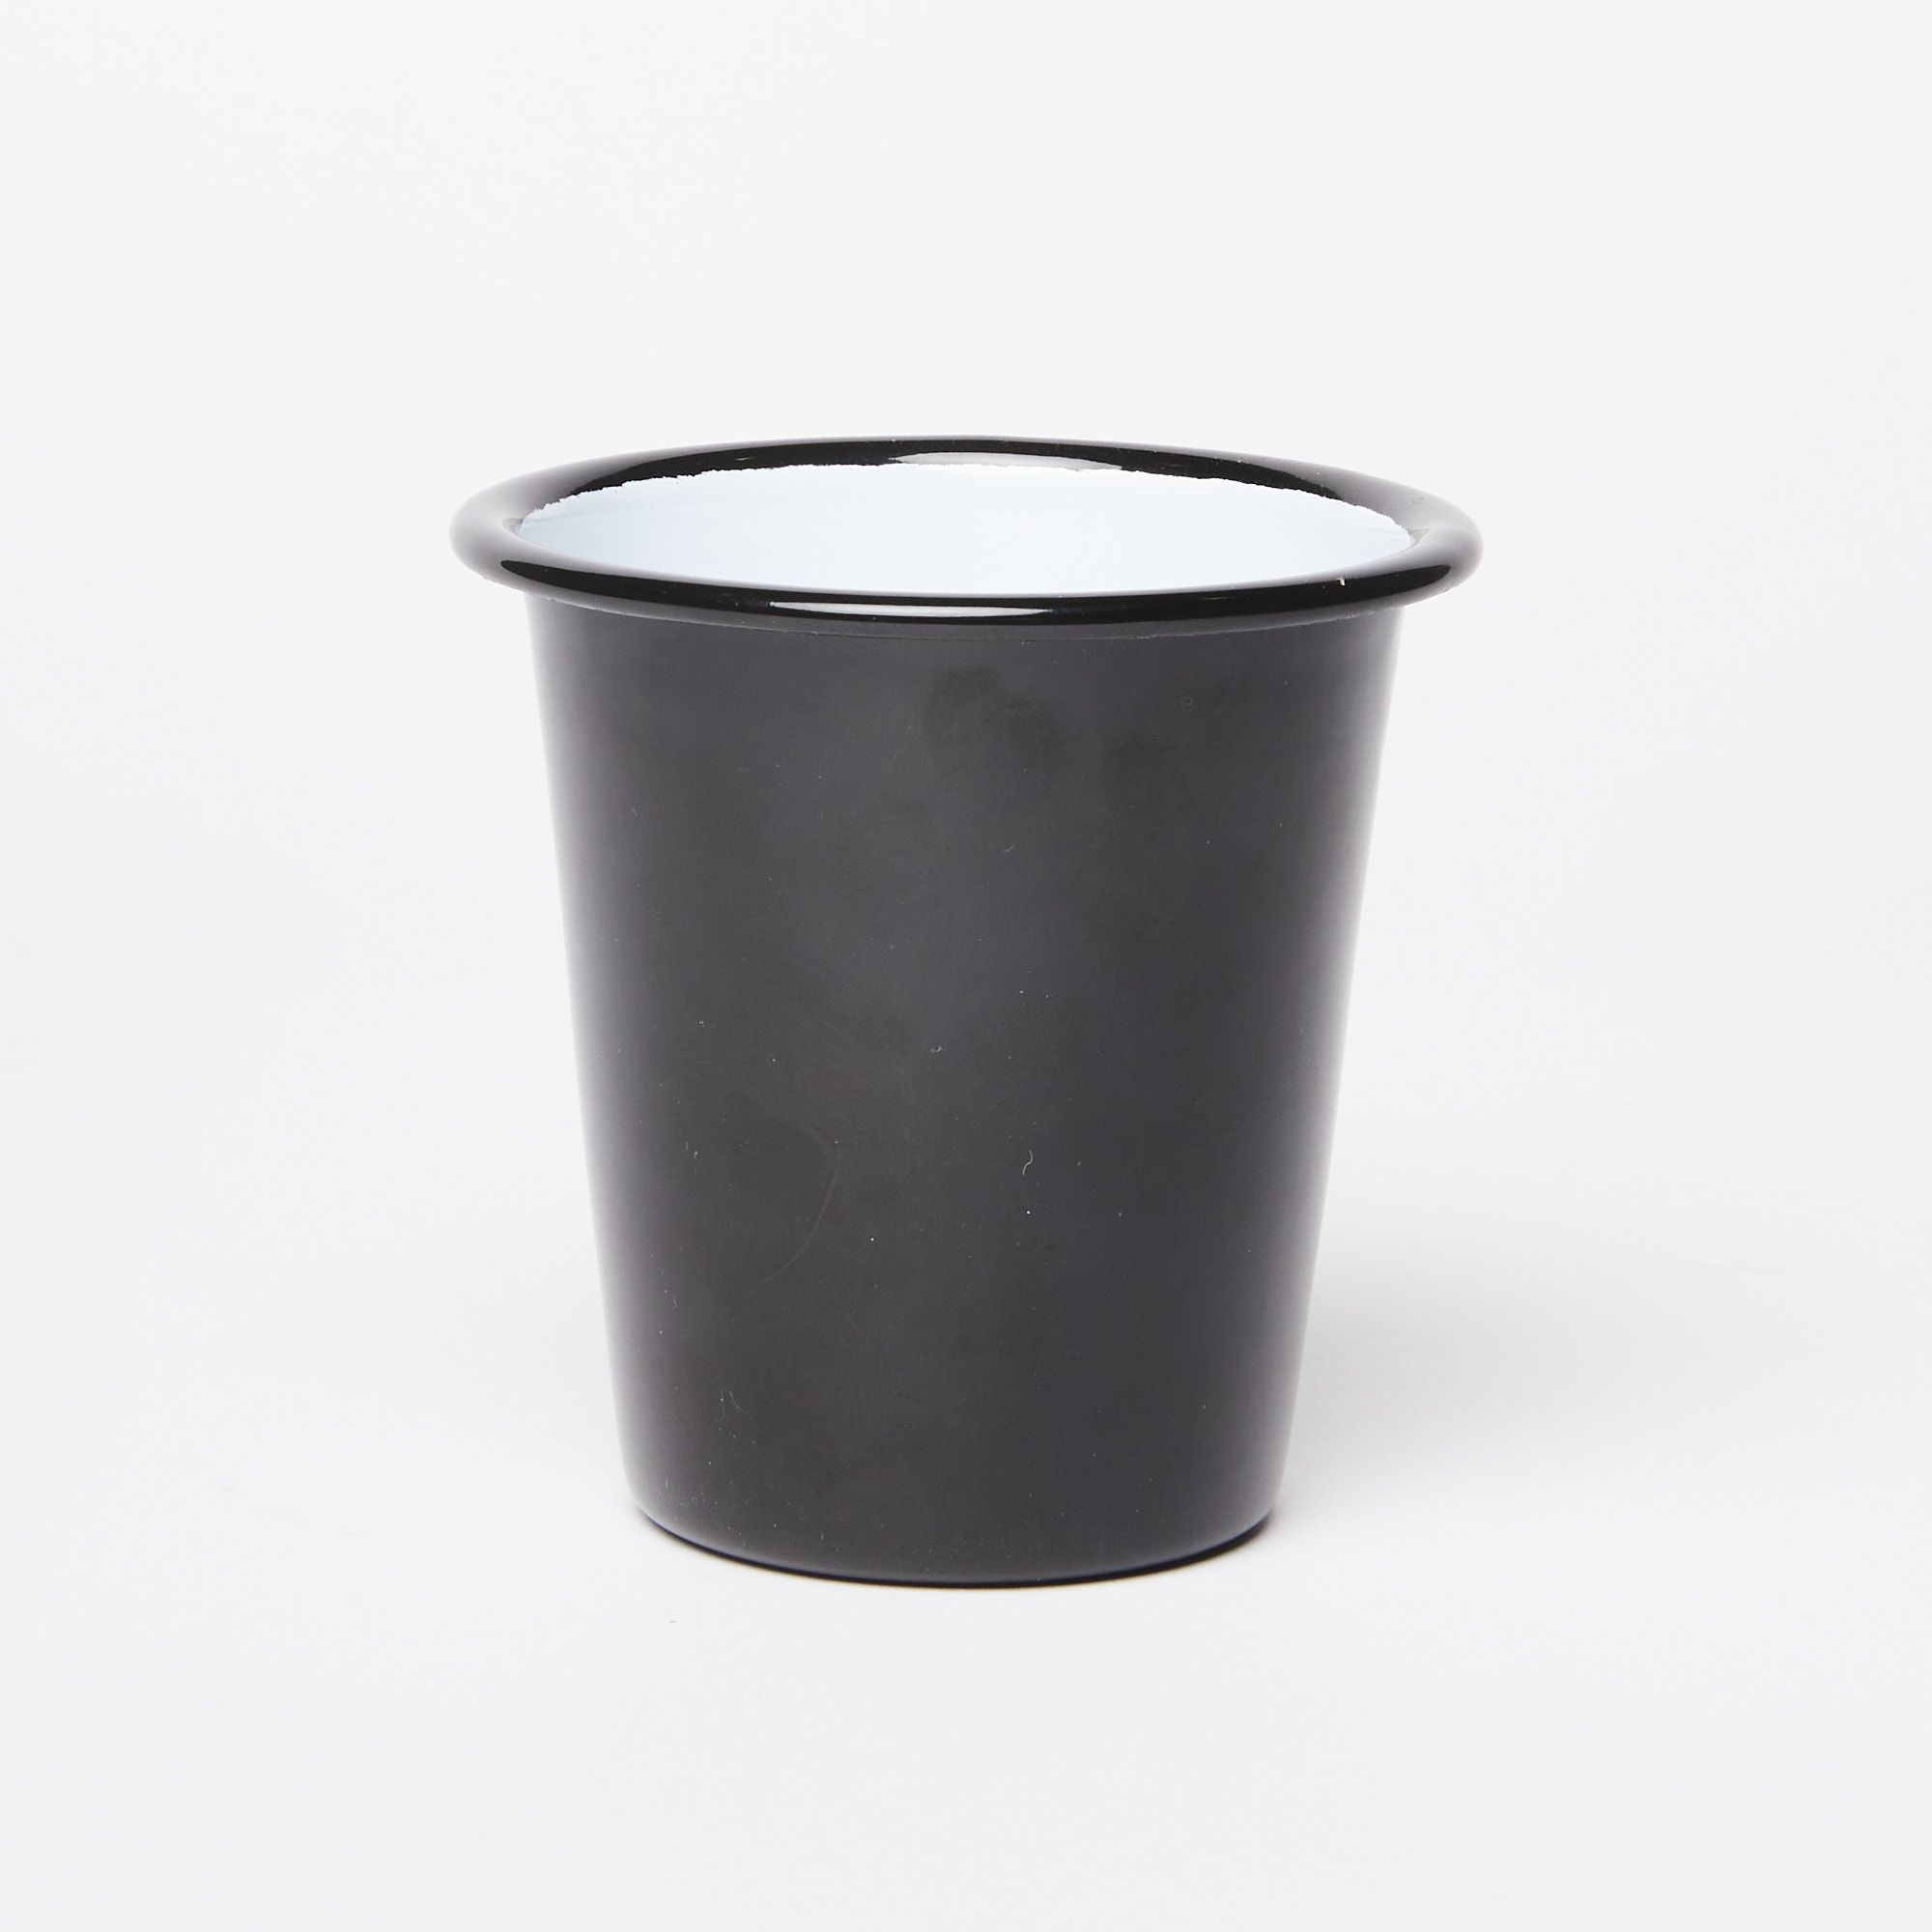 A short enamel cup with black exterior and white interior